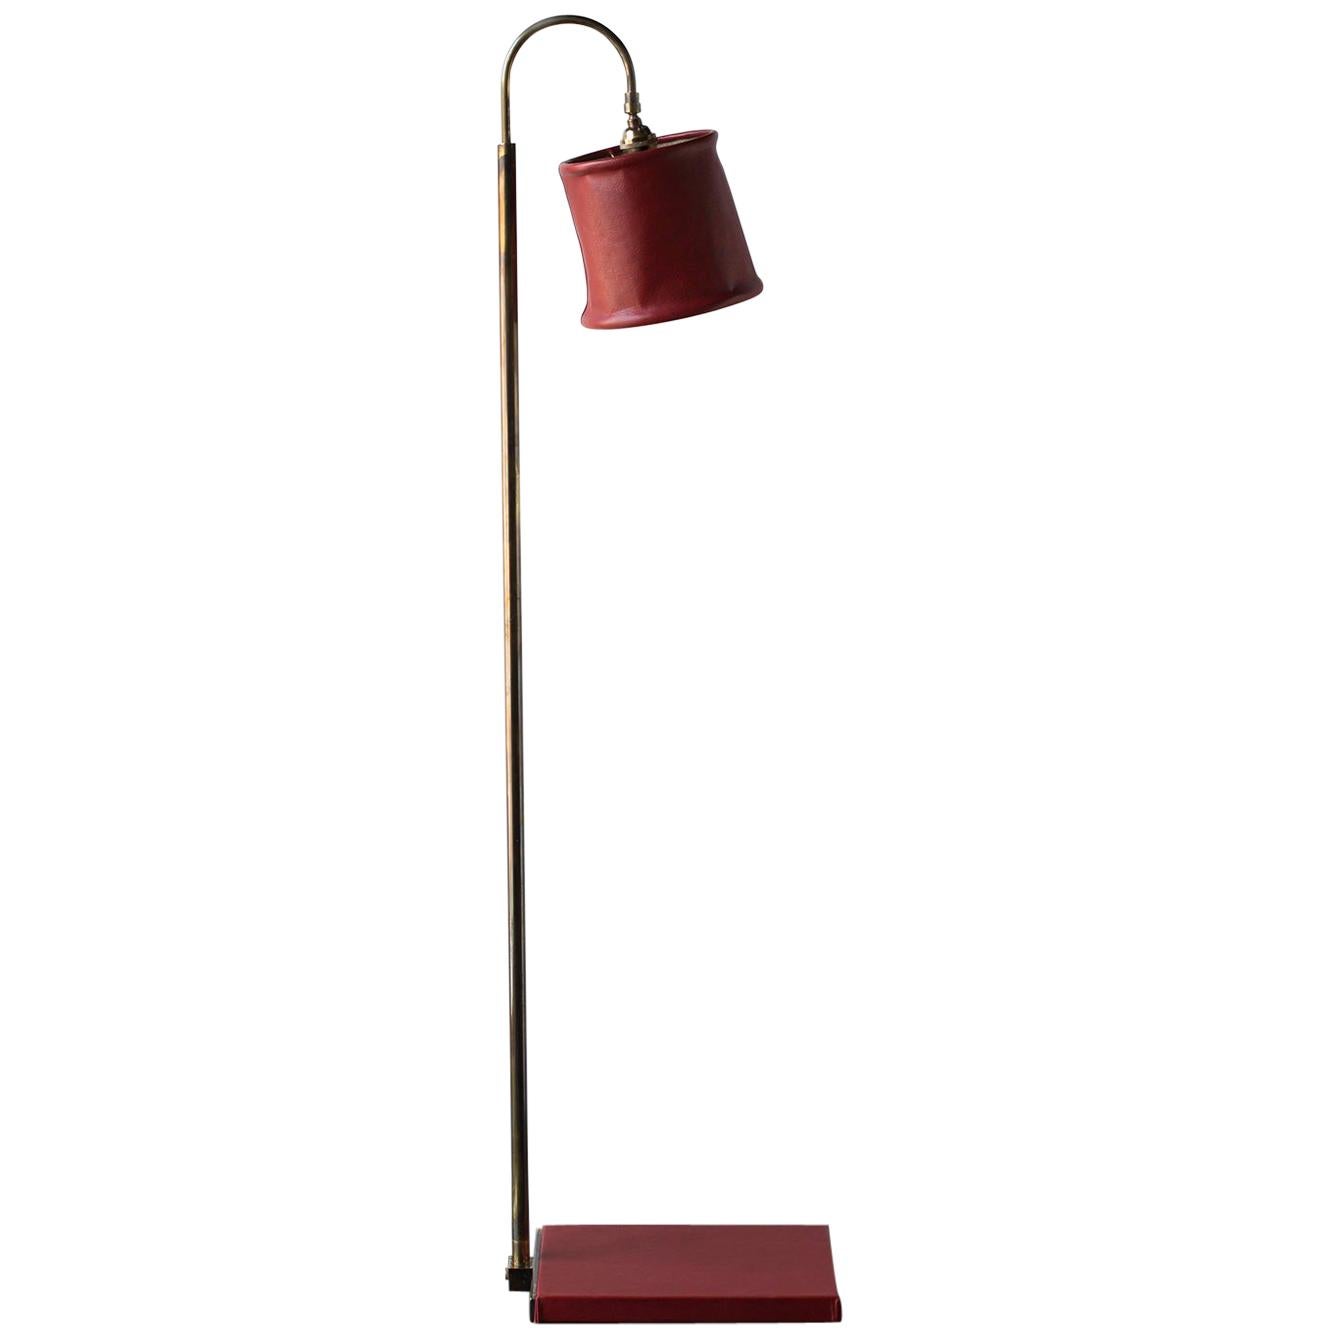 Series01 Floor Lamp, Hand-Dyed Gochujang, Red Leather, Smoke Patinated Brass For Sale